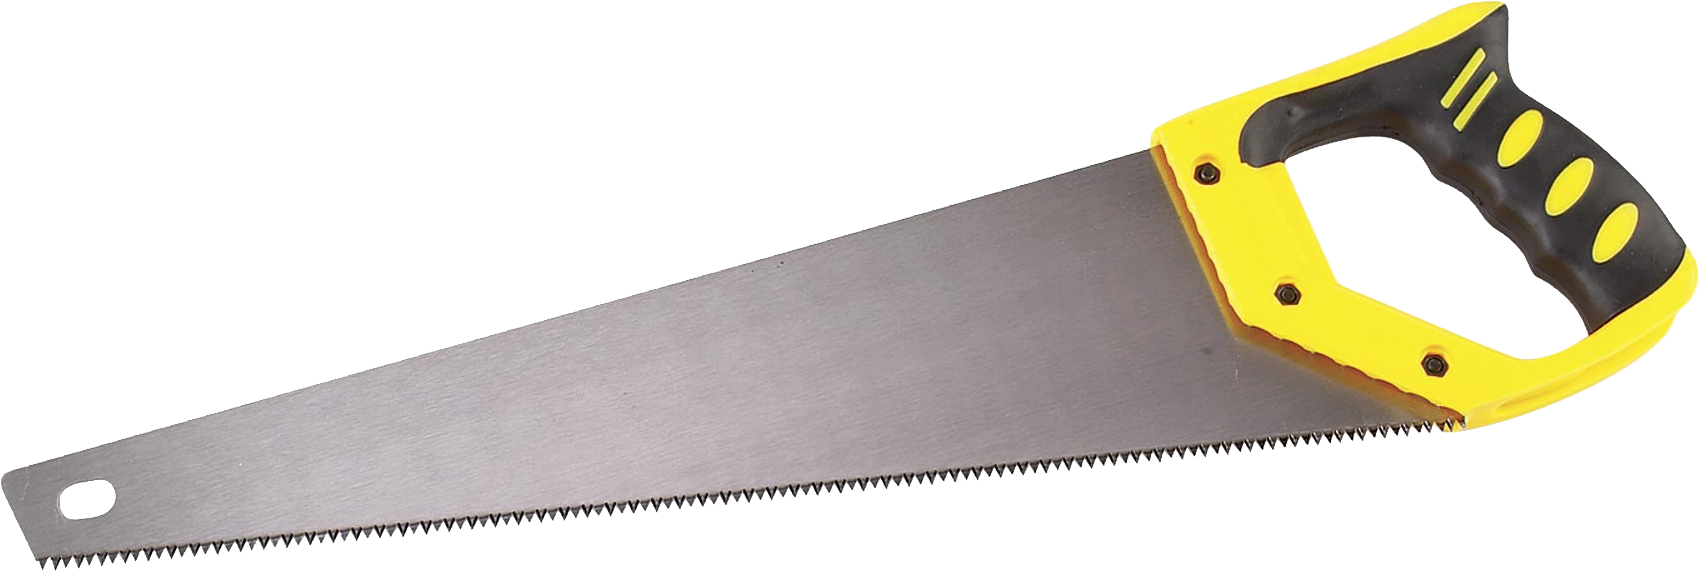 Hand Saw PNG-PlusPNG.com-600